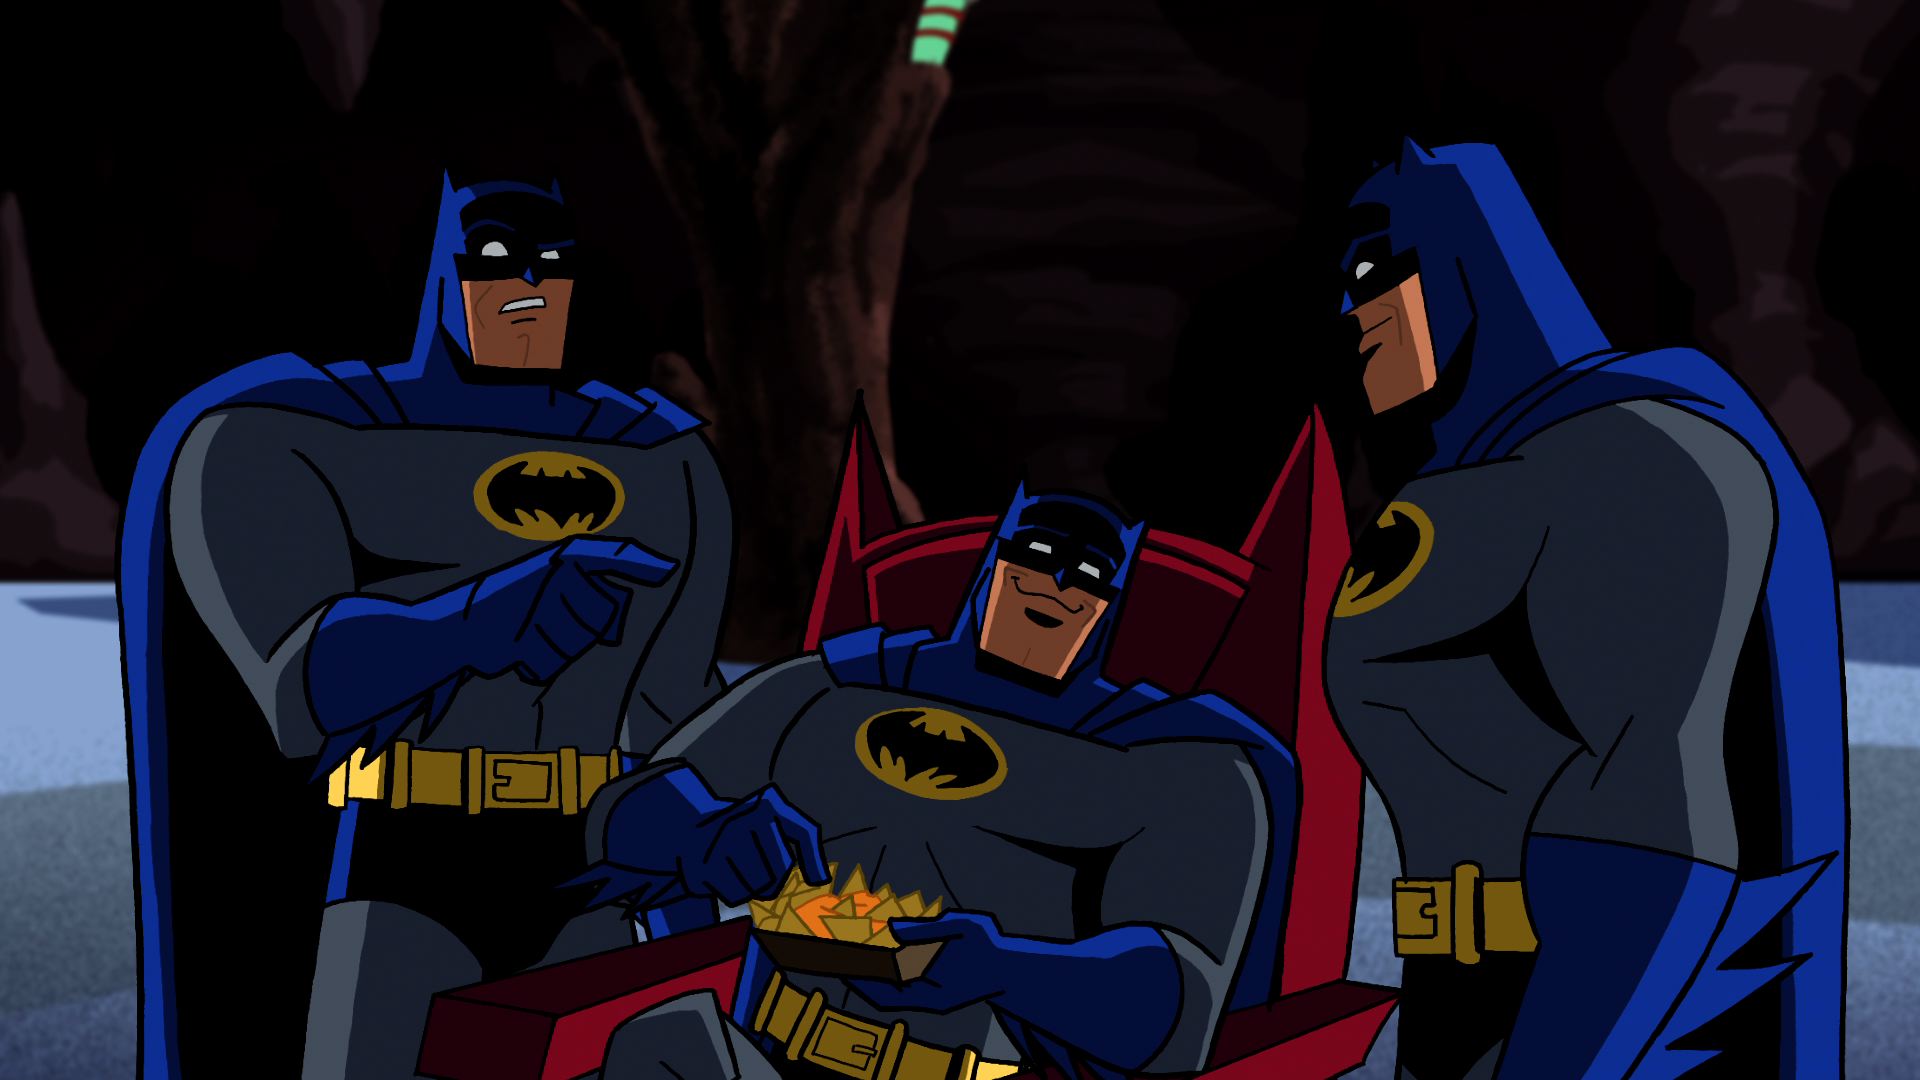 batman the brave and the bold episodes